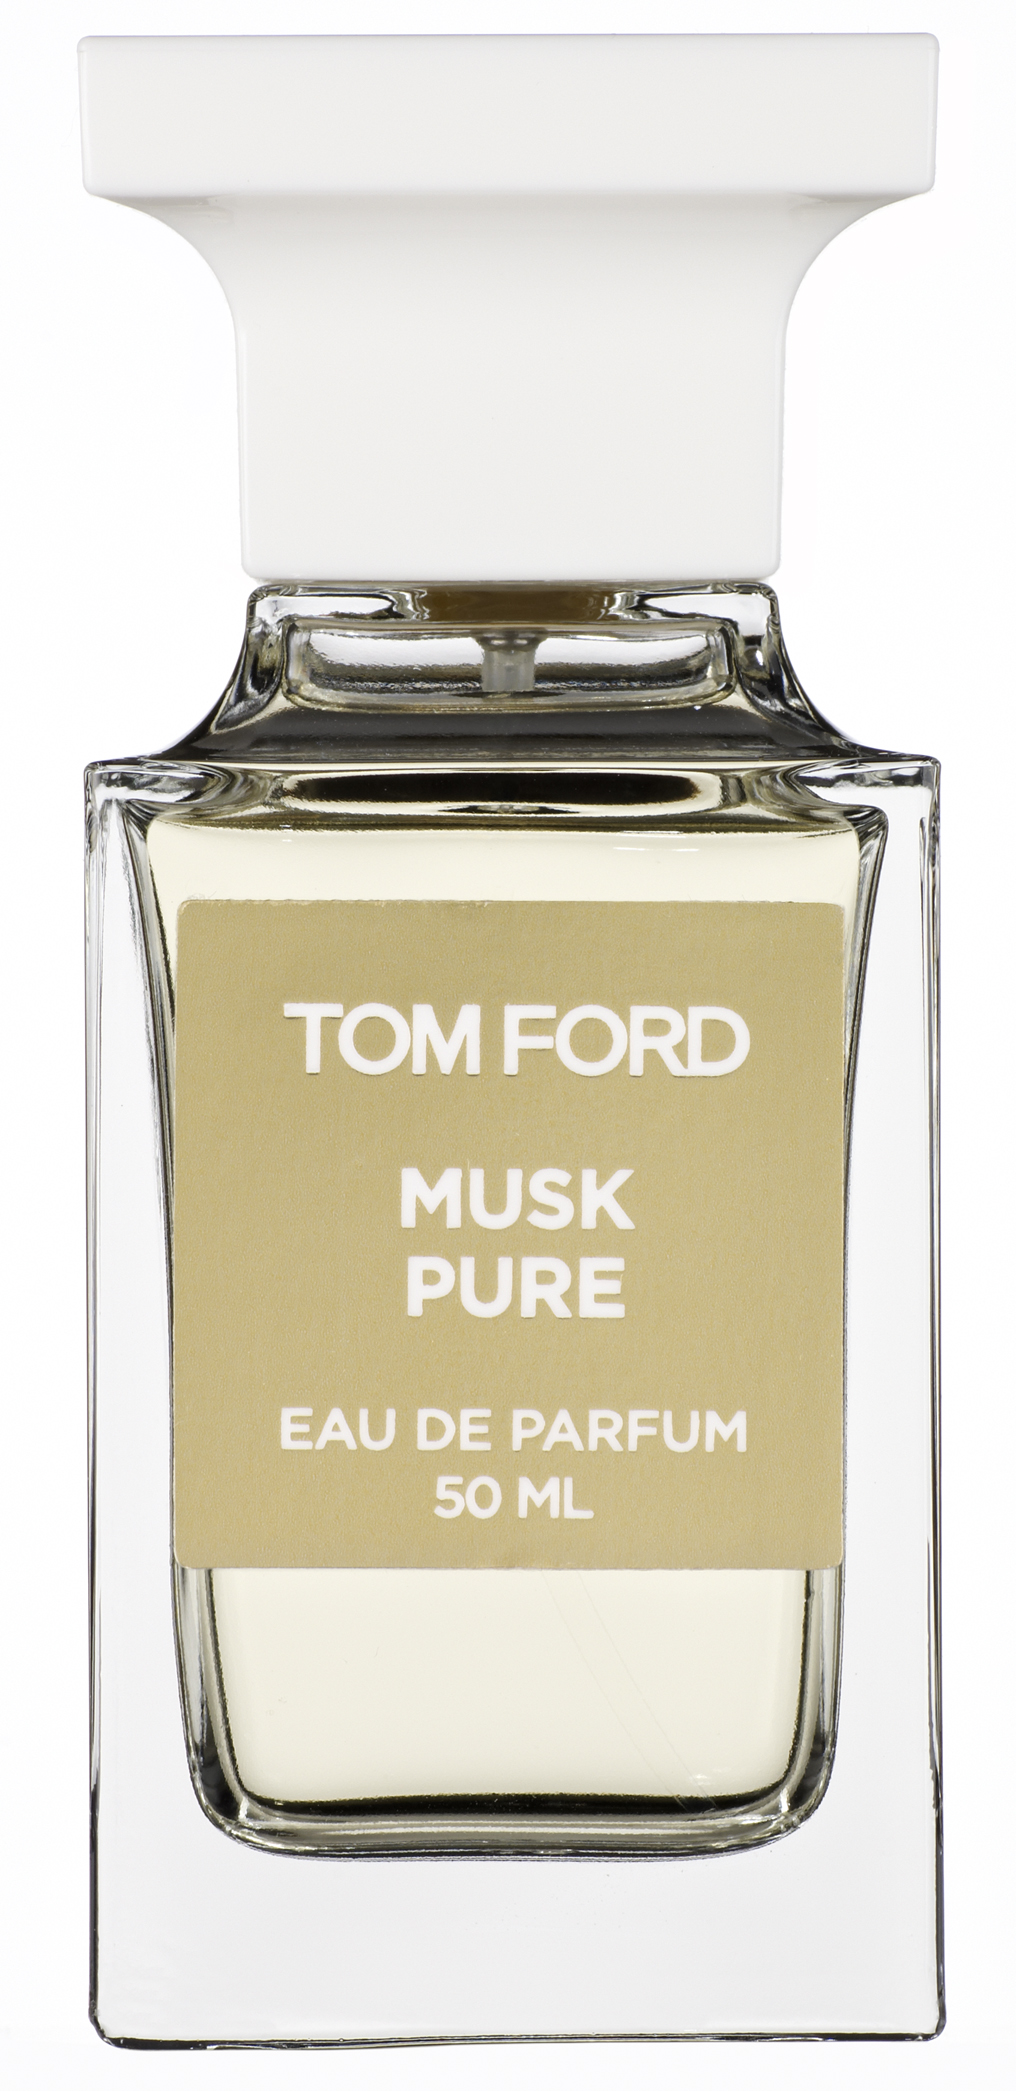 Tom ford blend musk pure #2